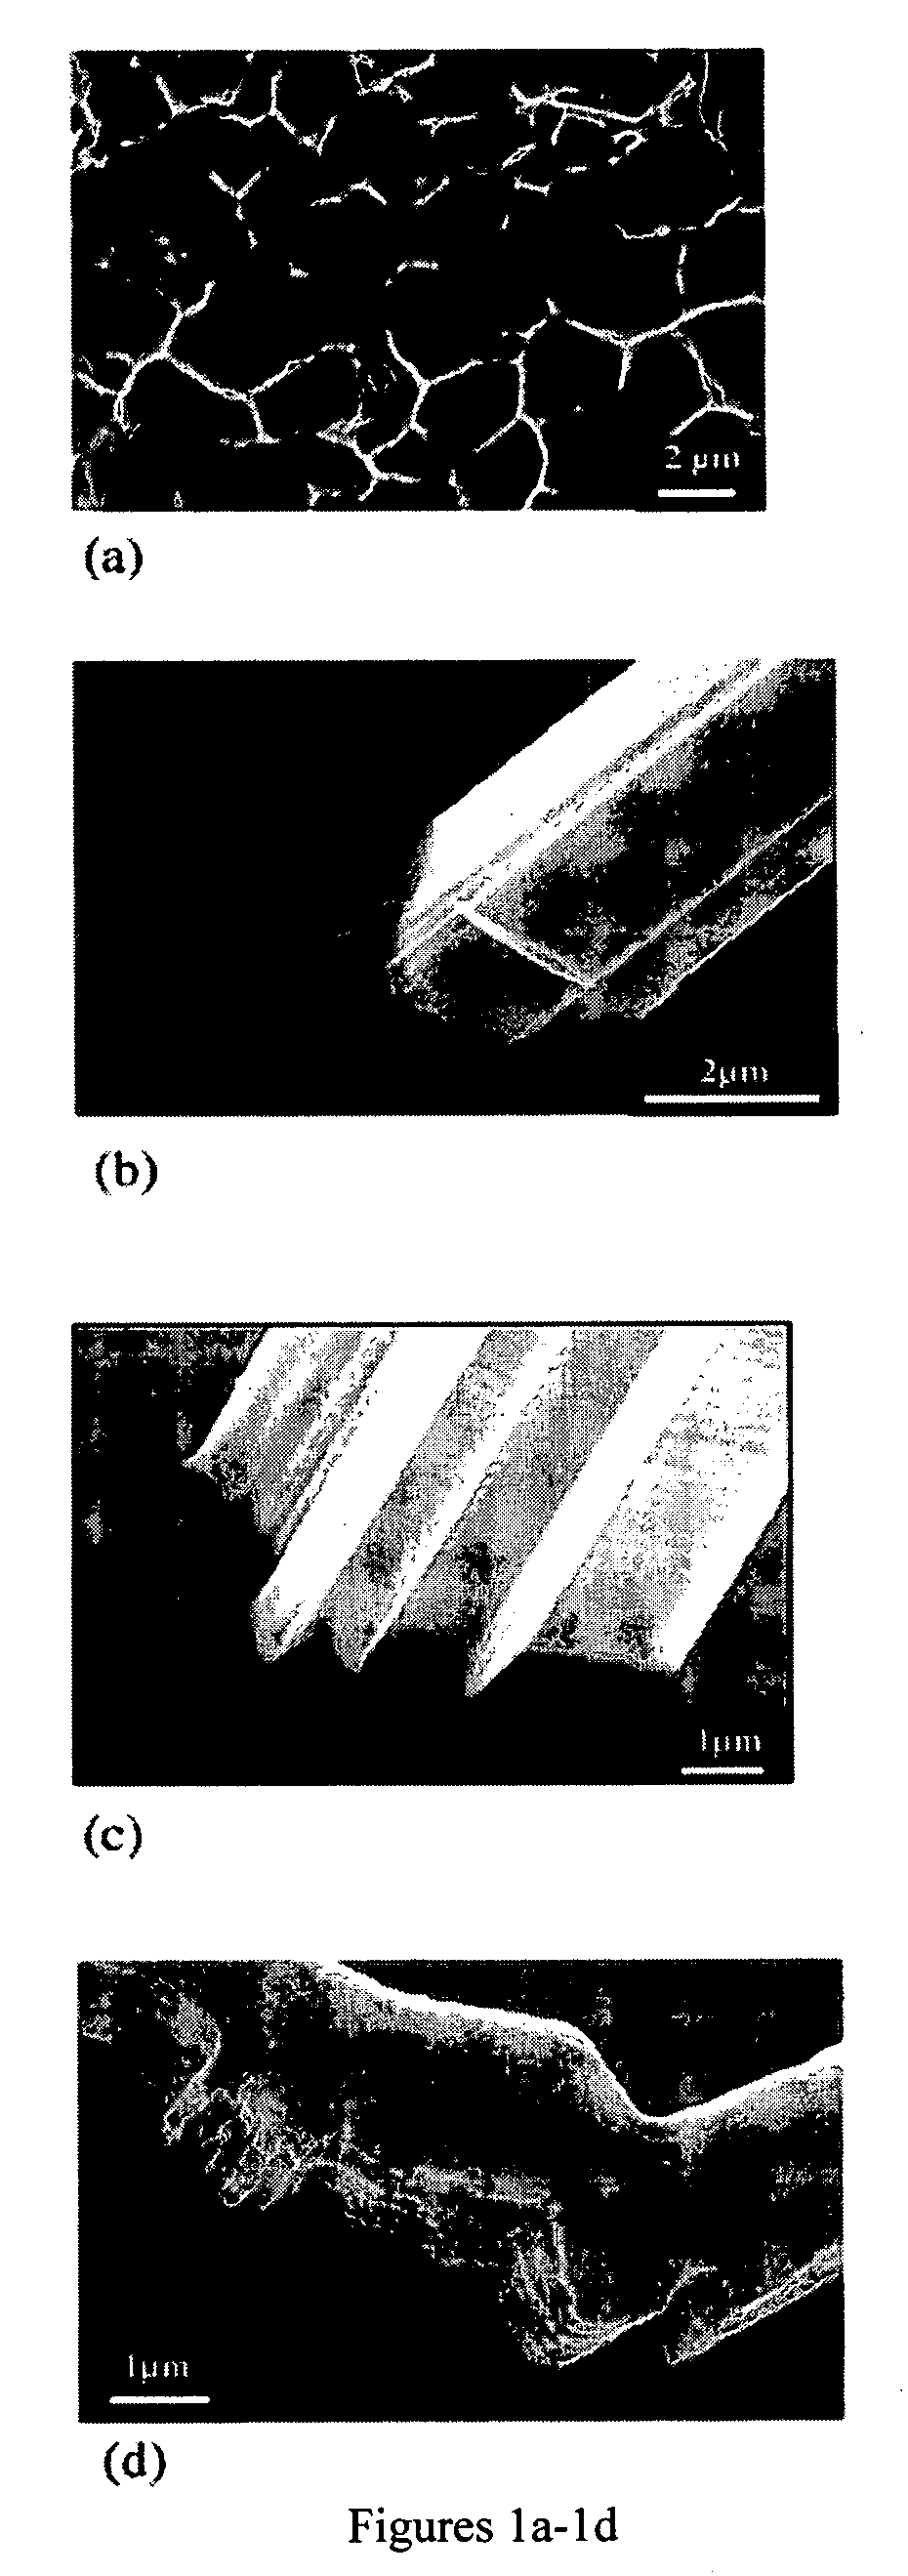 Reduction of spontaneous metal whisker formation